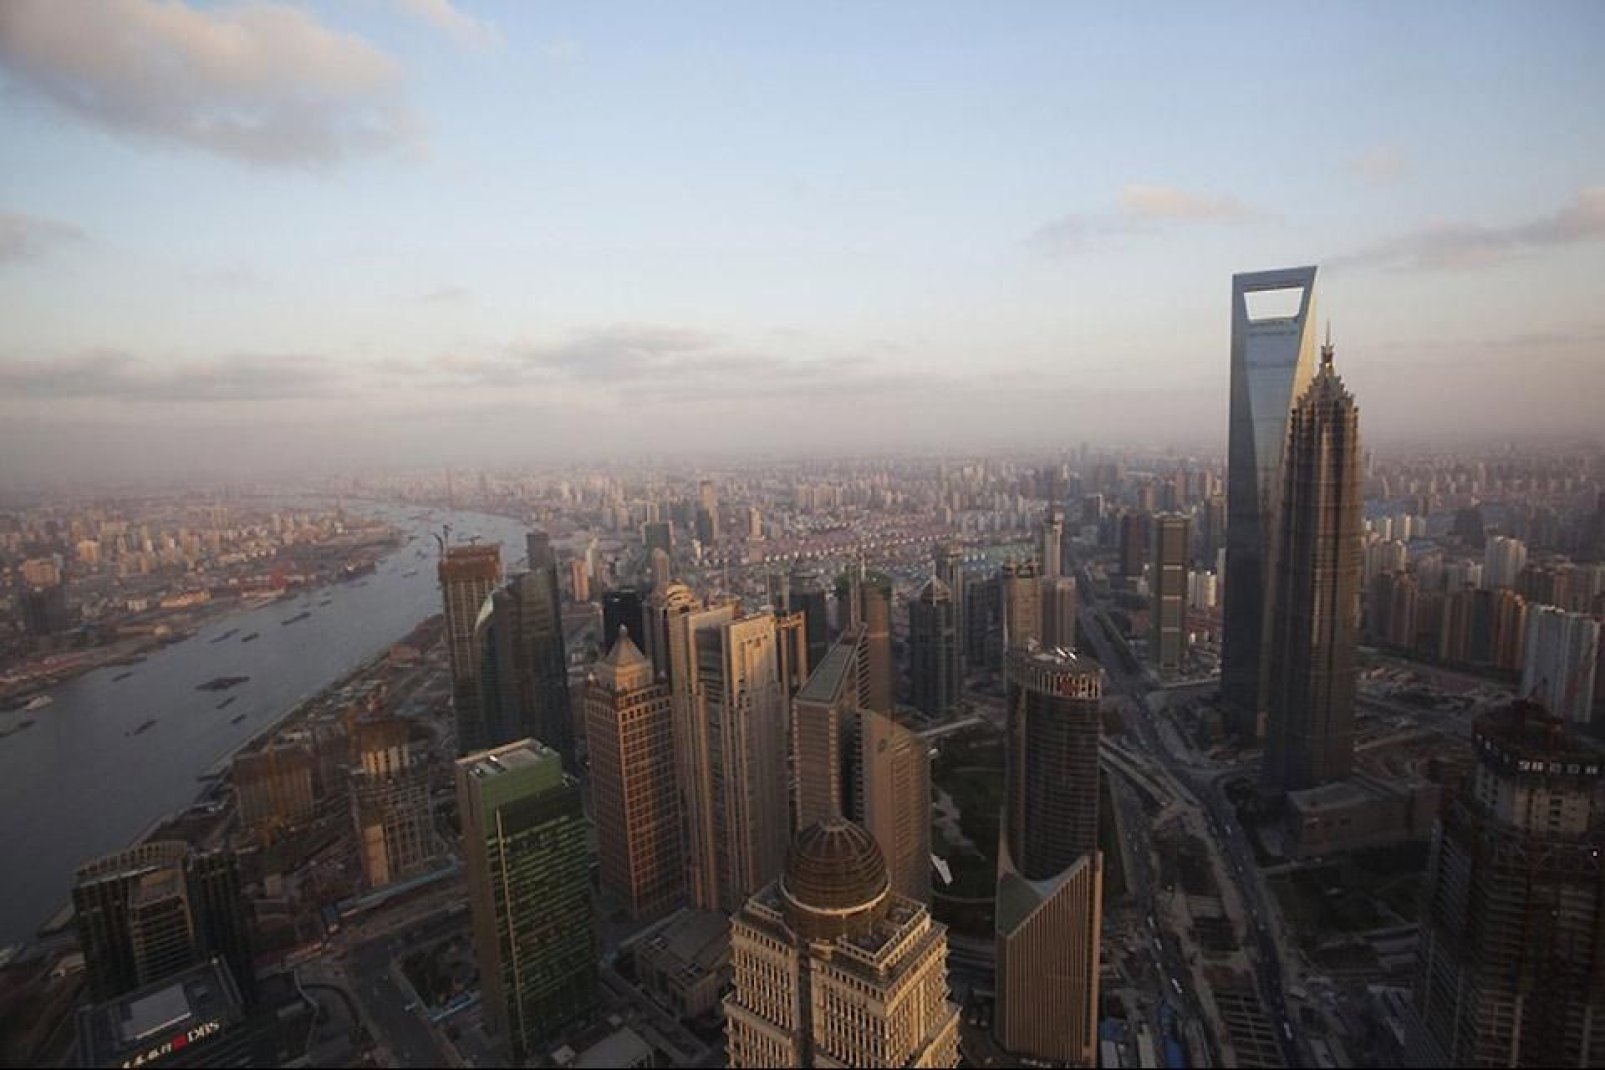 A panoramic view of Shanghai. The Shanghai Tower can be made out in the city's business district.